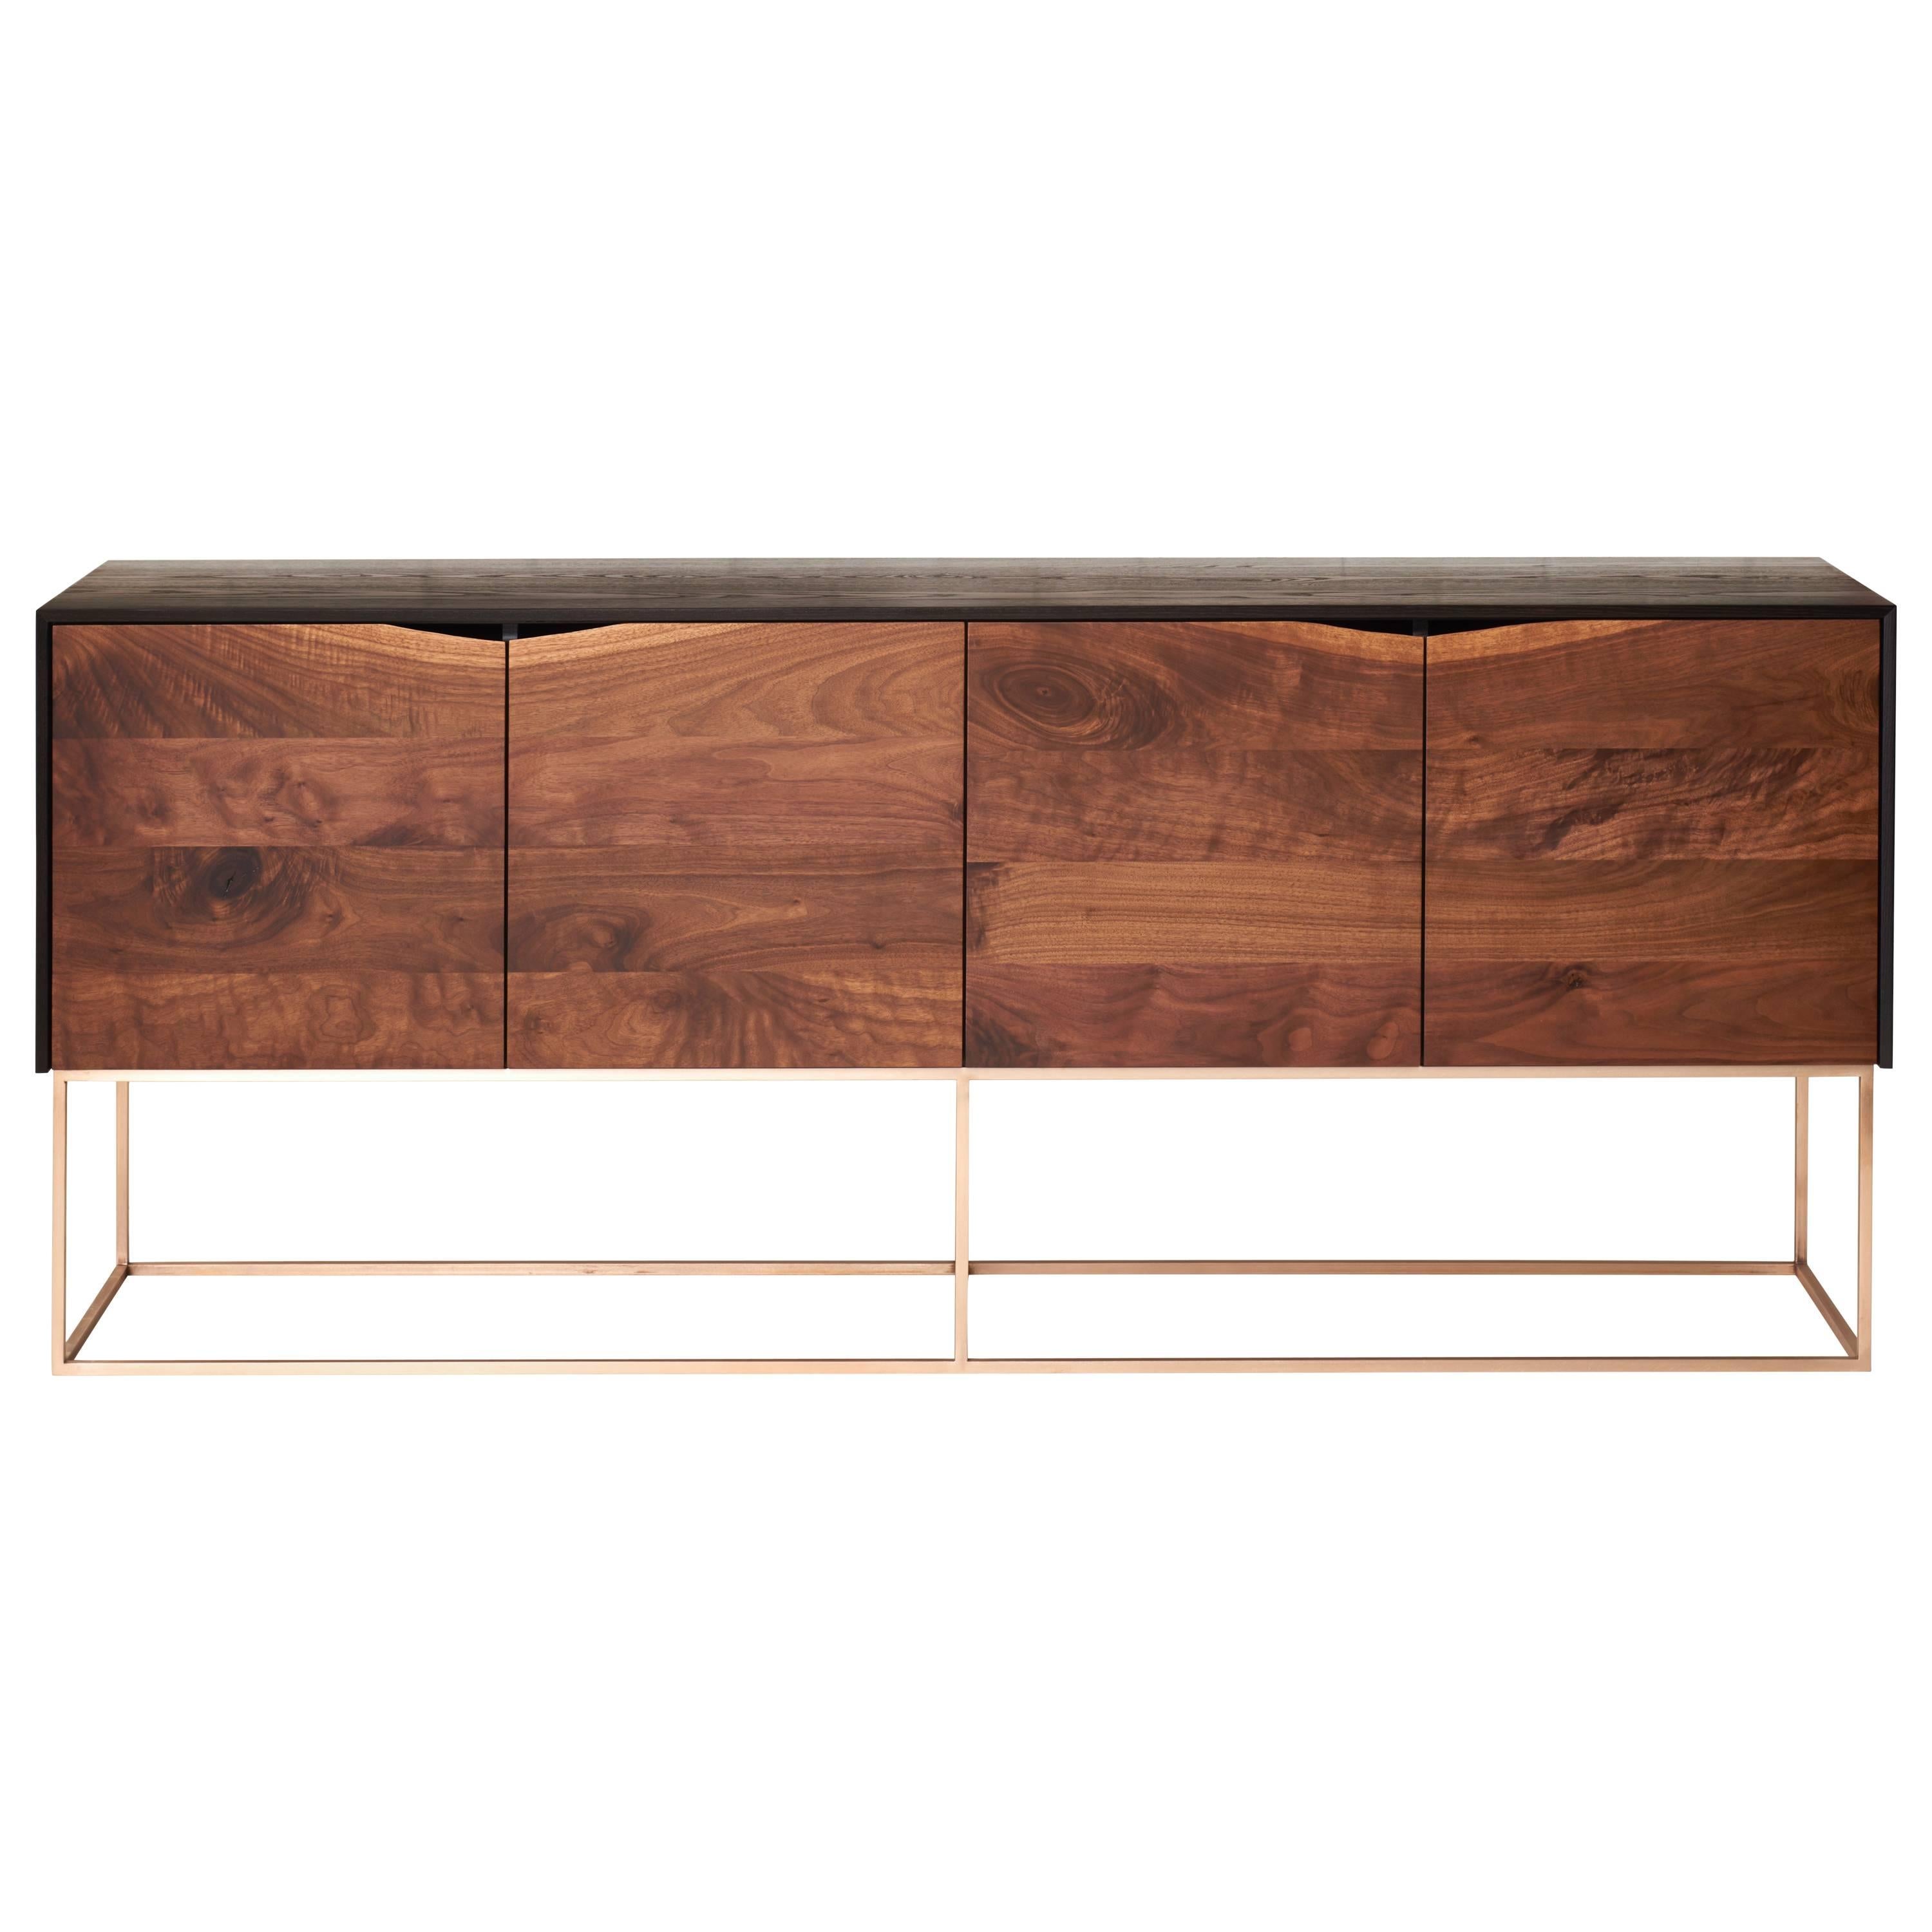 Rustic Modern Credenza, Handcrafted of American Hardwoods with a Bronze Base For Sale